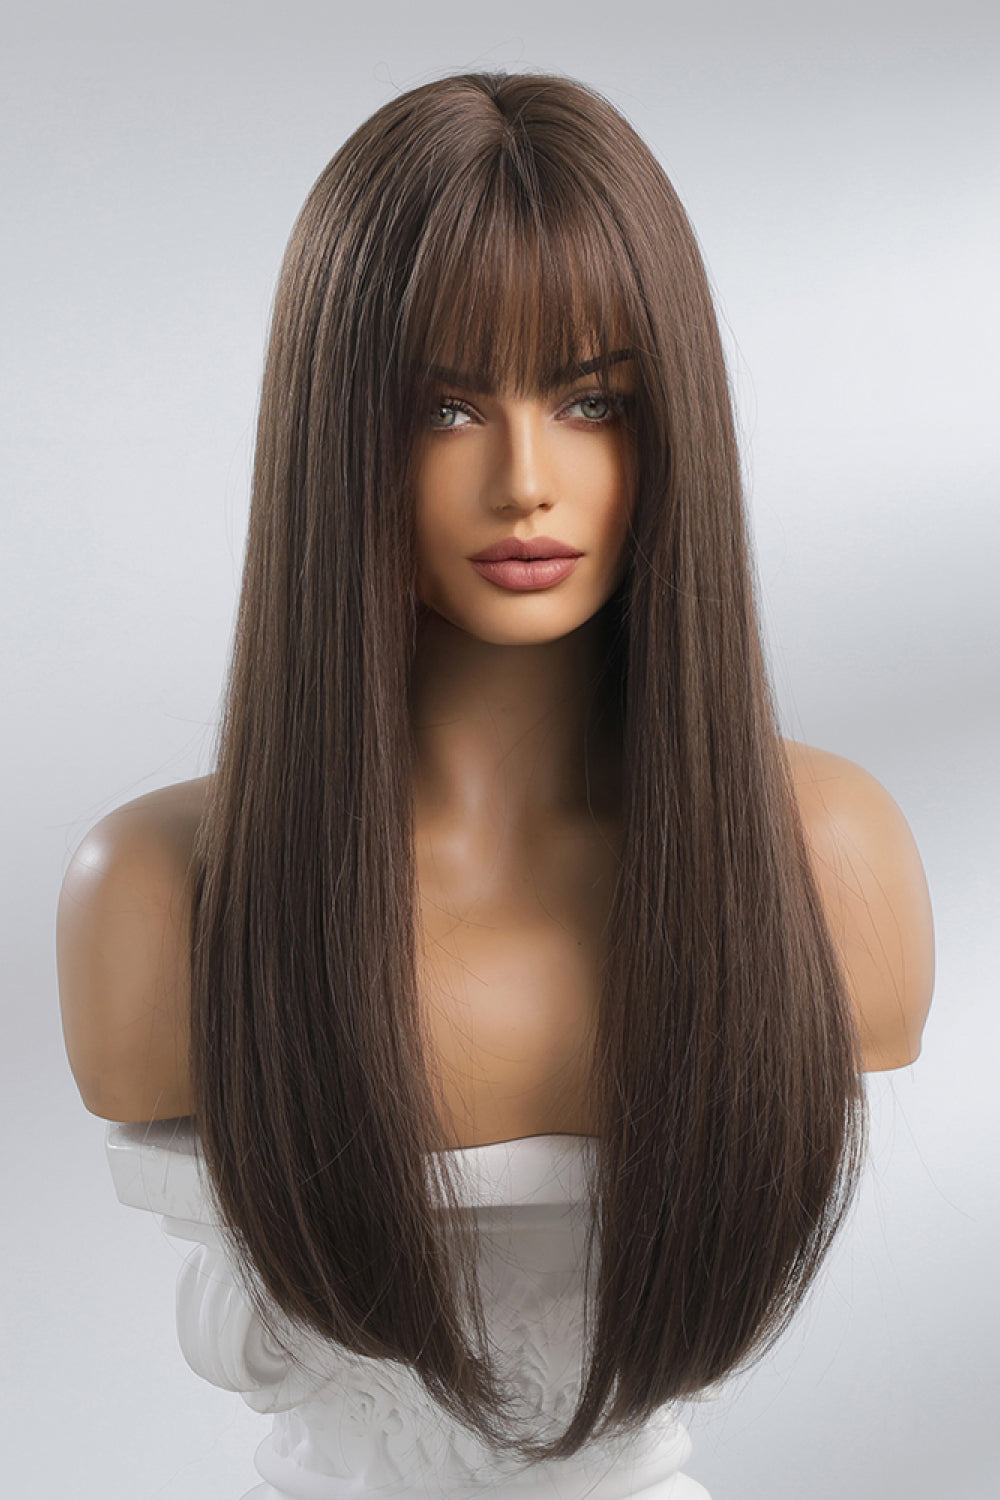 Full Machine Long Straight Synthetic Wigs 26'' COCO CRESS